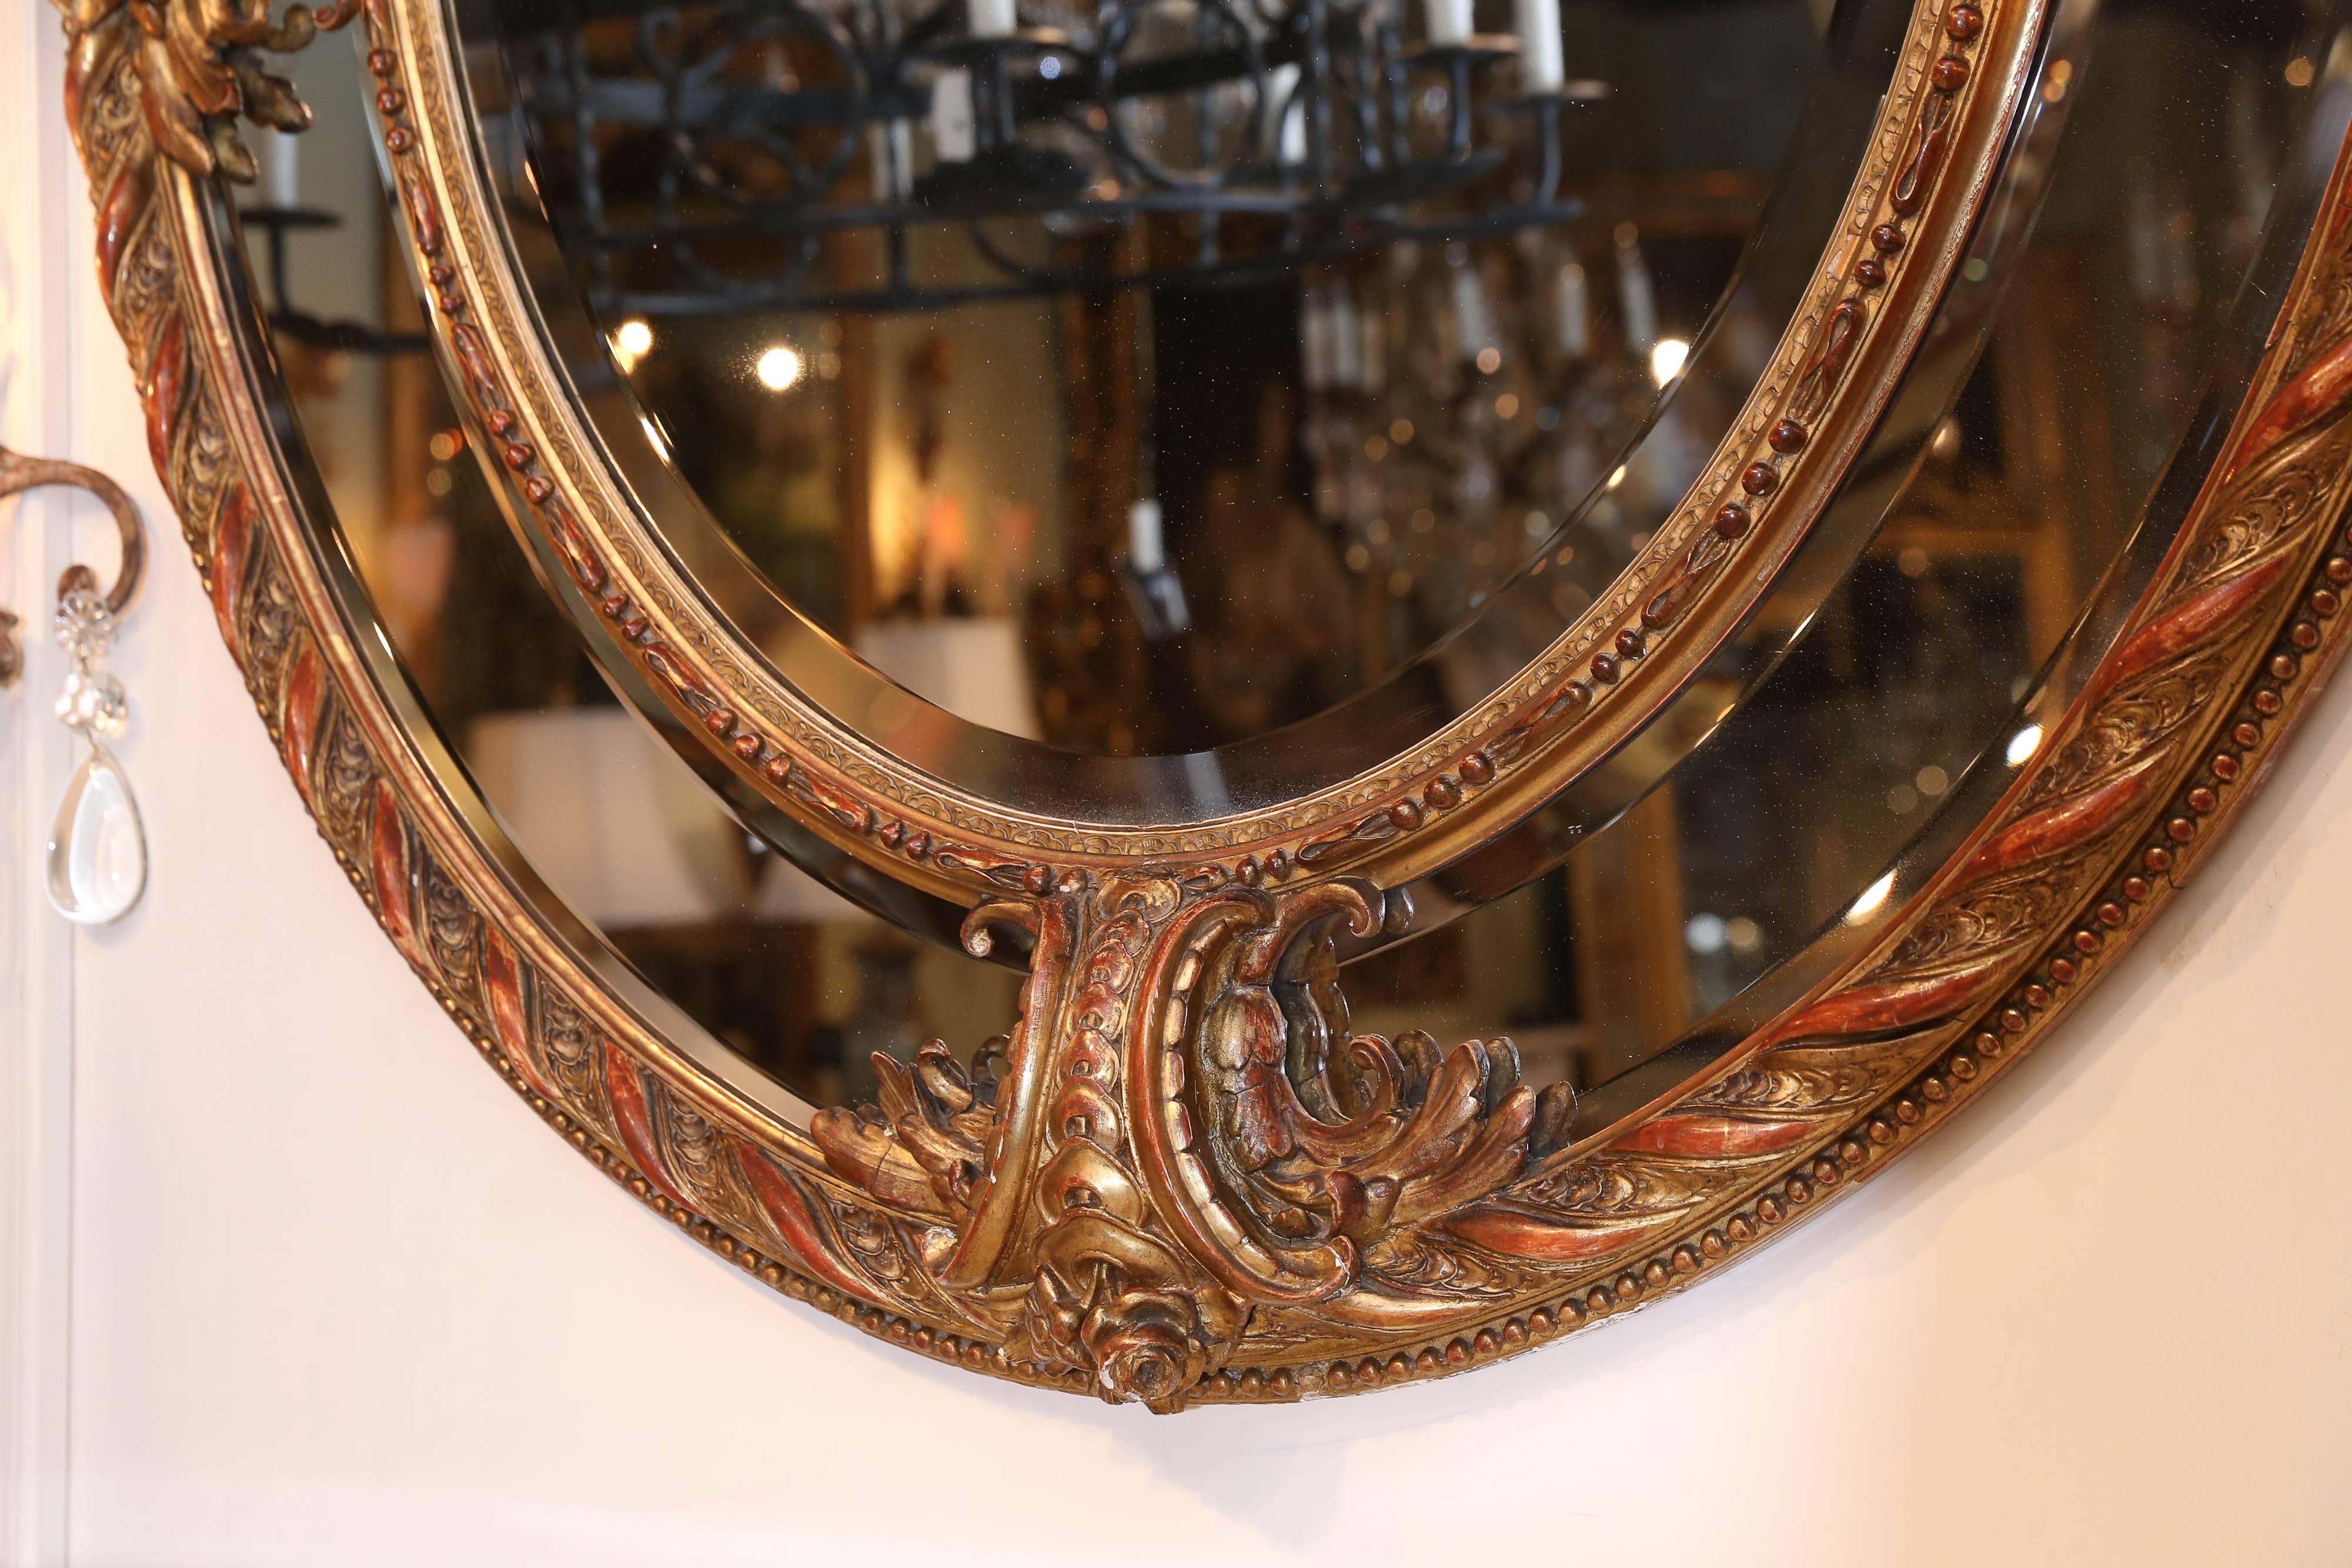 19th century French oval gilt mirror having a beveled central plate within border
Surrounded by stepped beveled plate In the Louis XVI style;
Having an elaborate ribbon and floral crest.